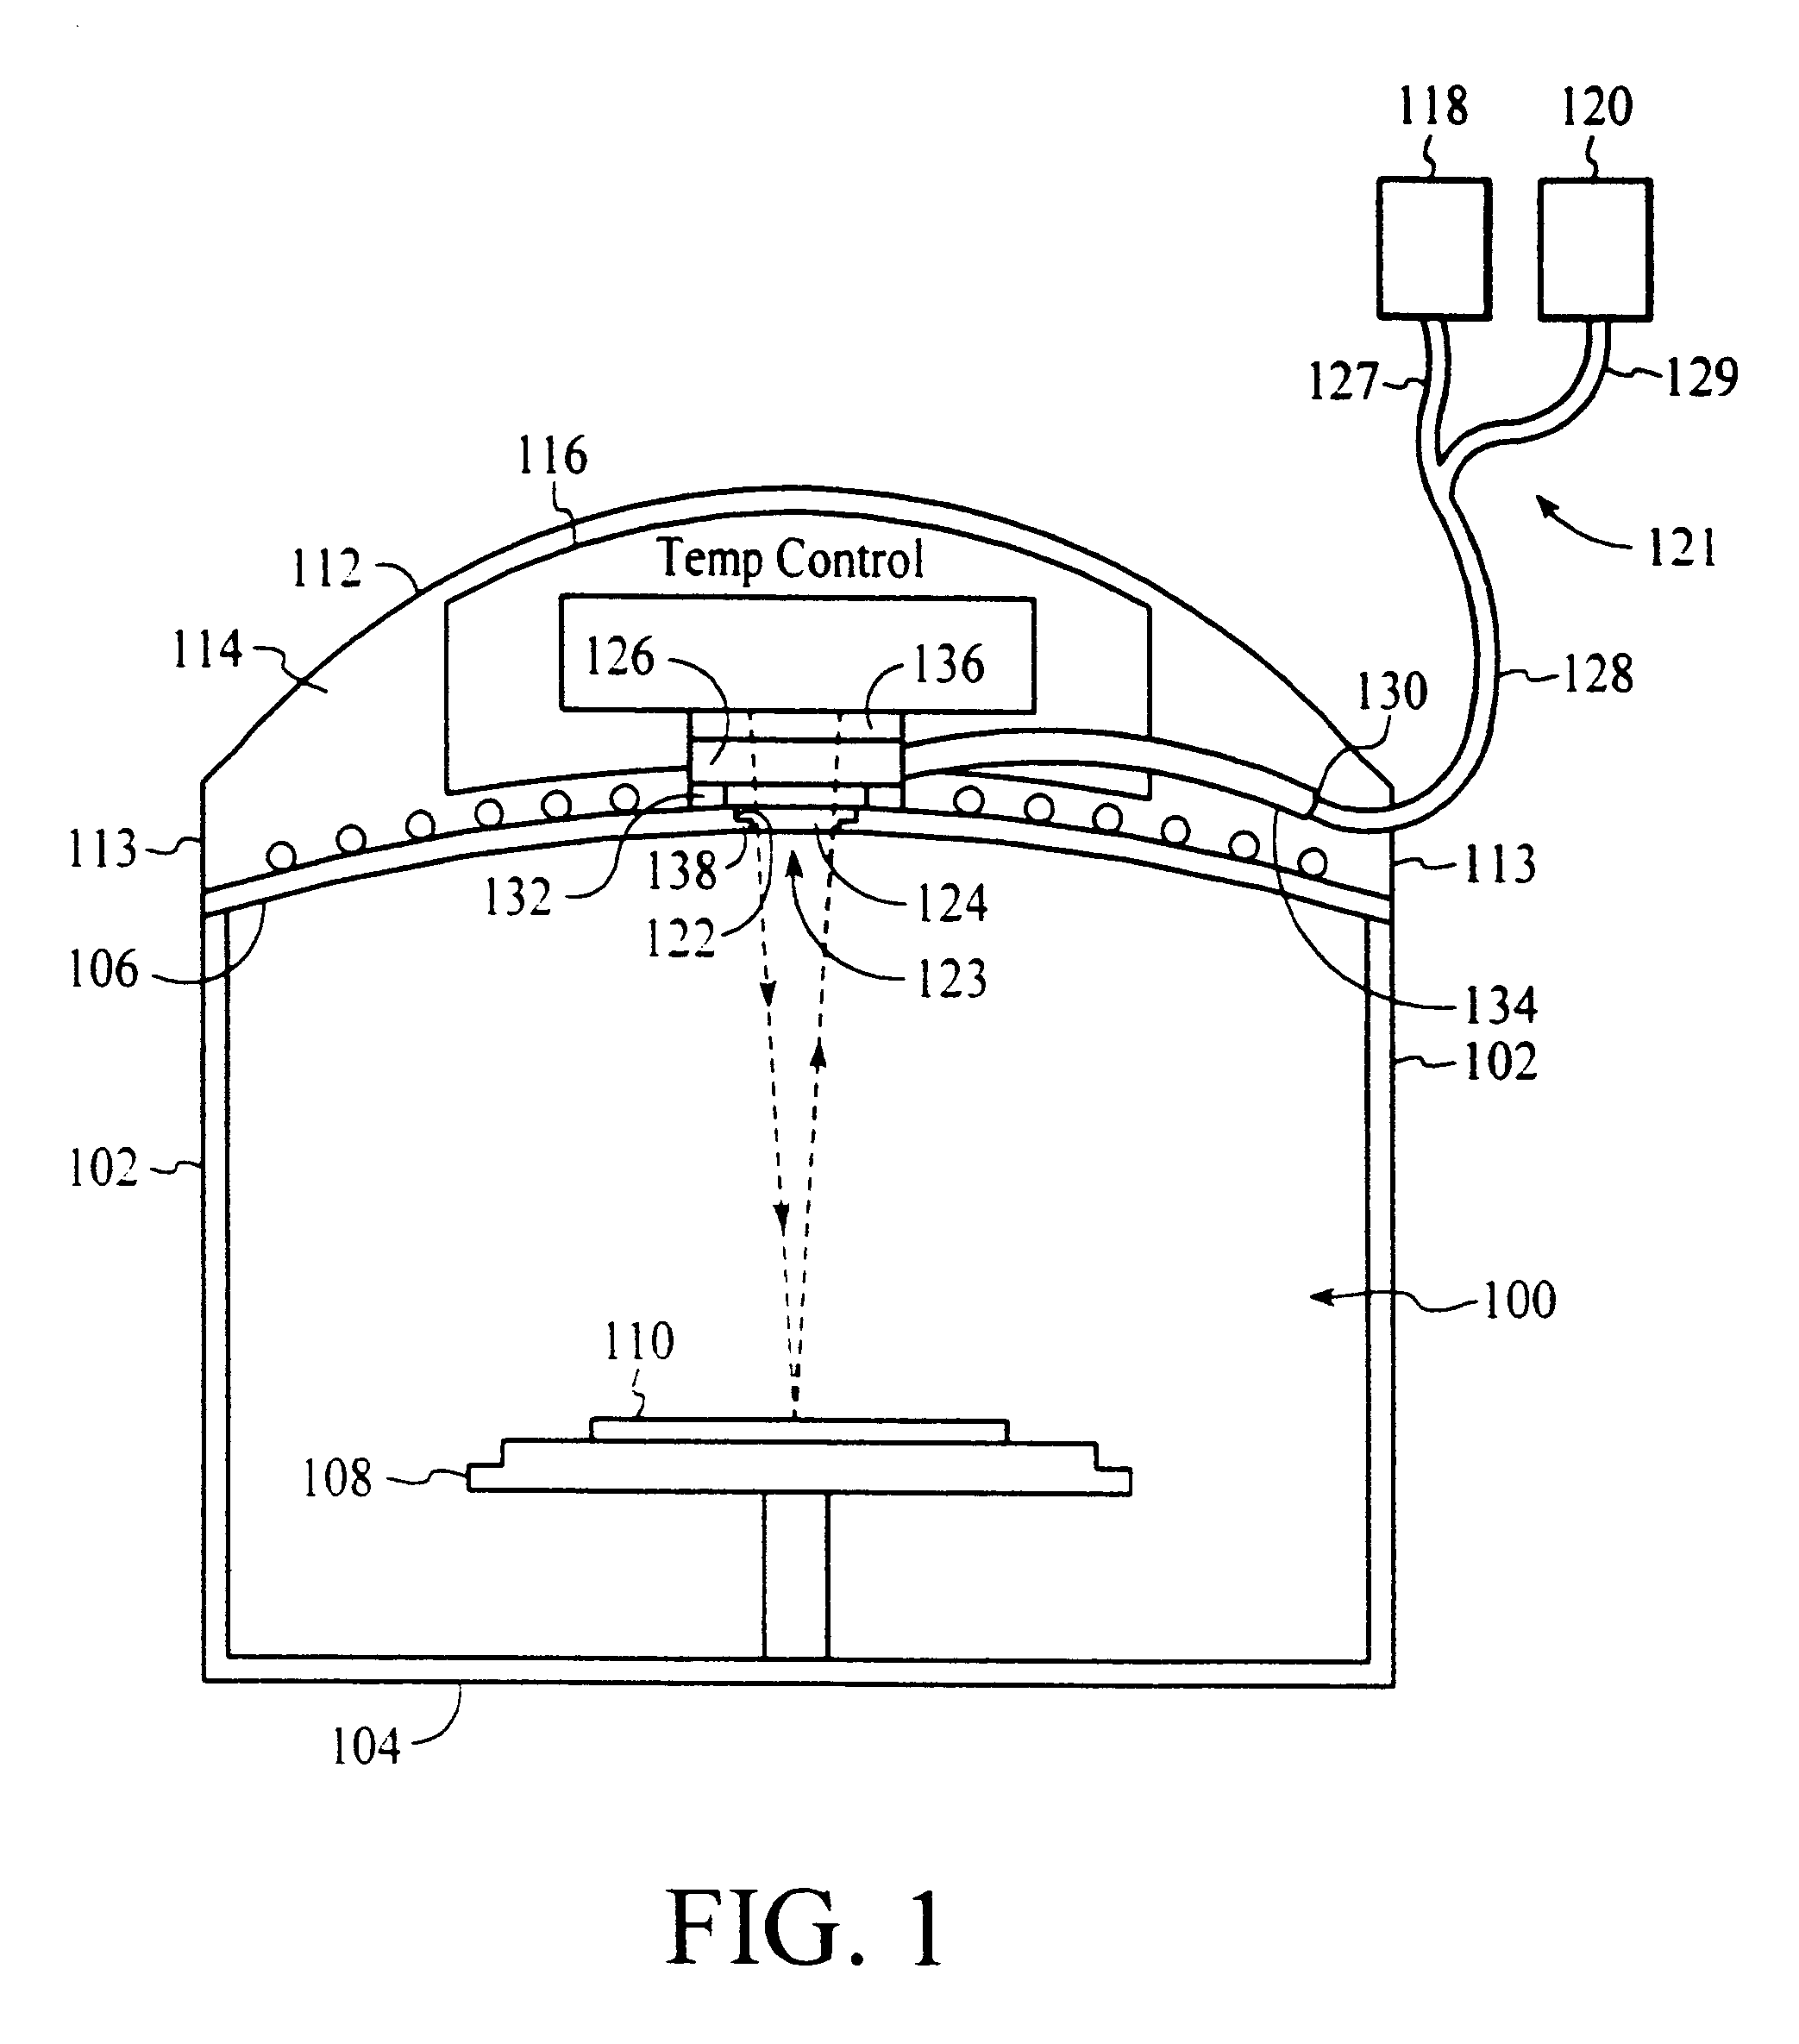 Apparatus and method for monitoring processing of a substrate